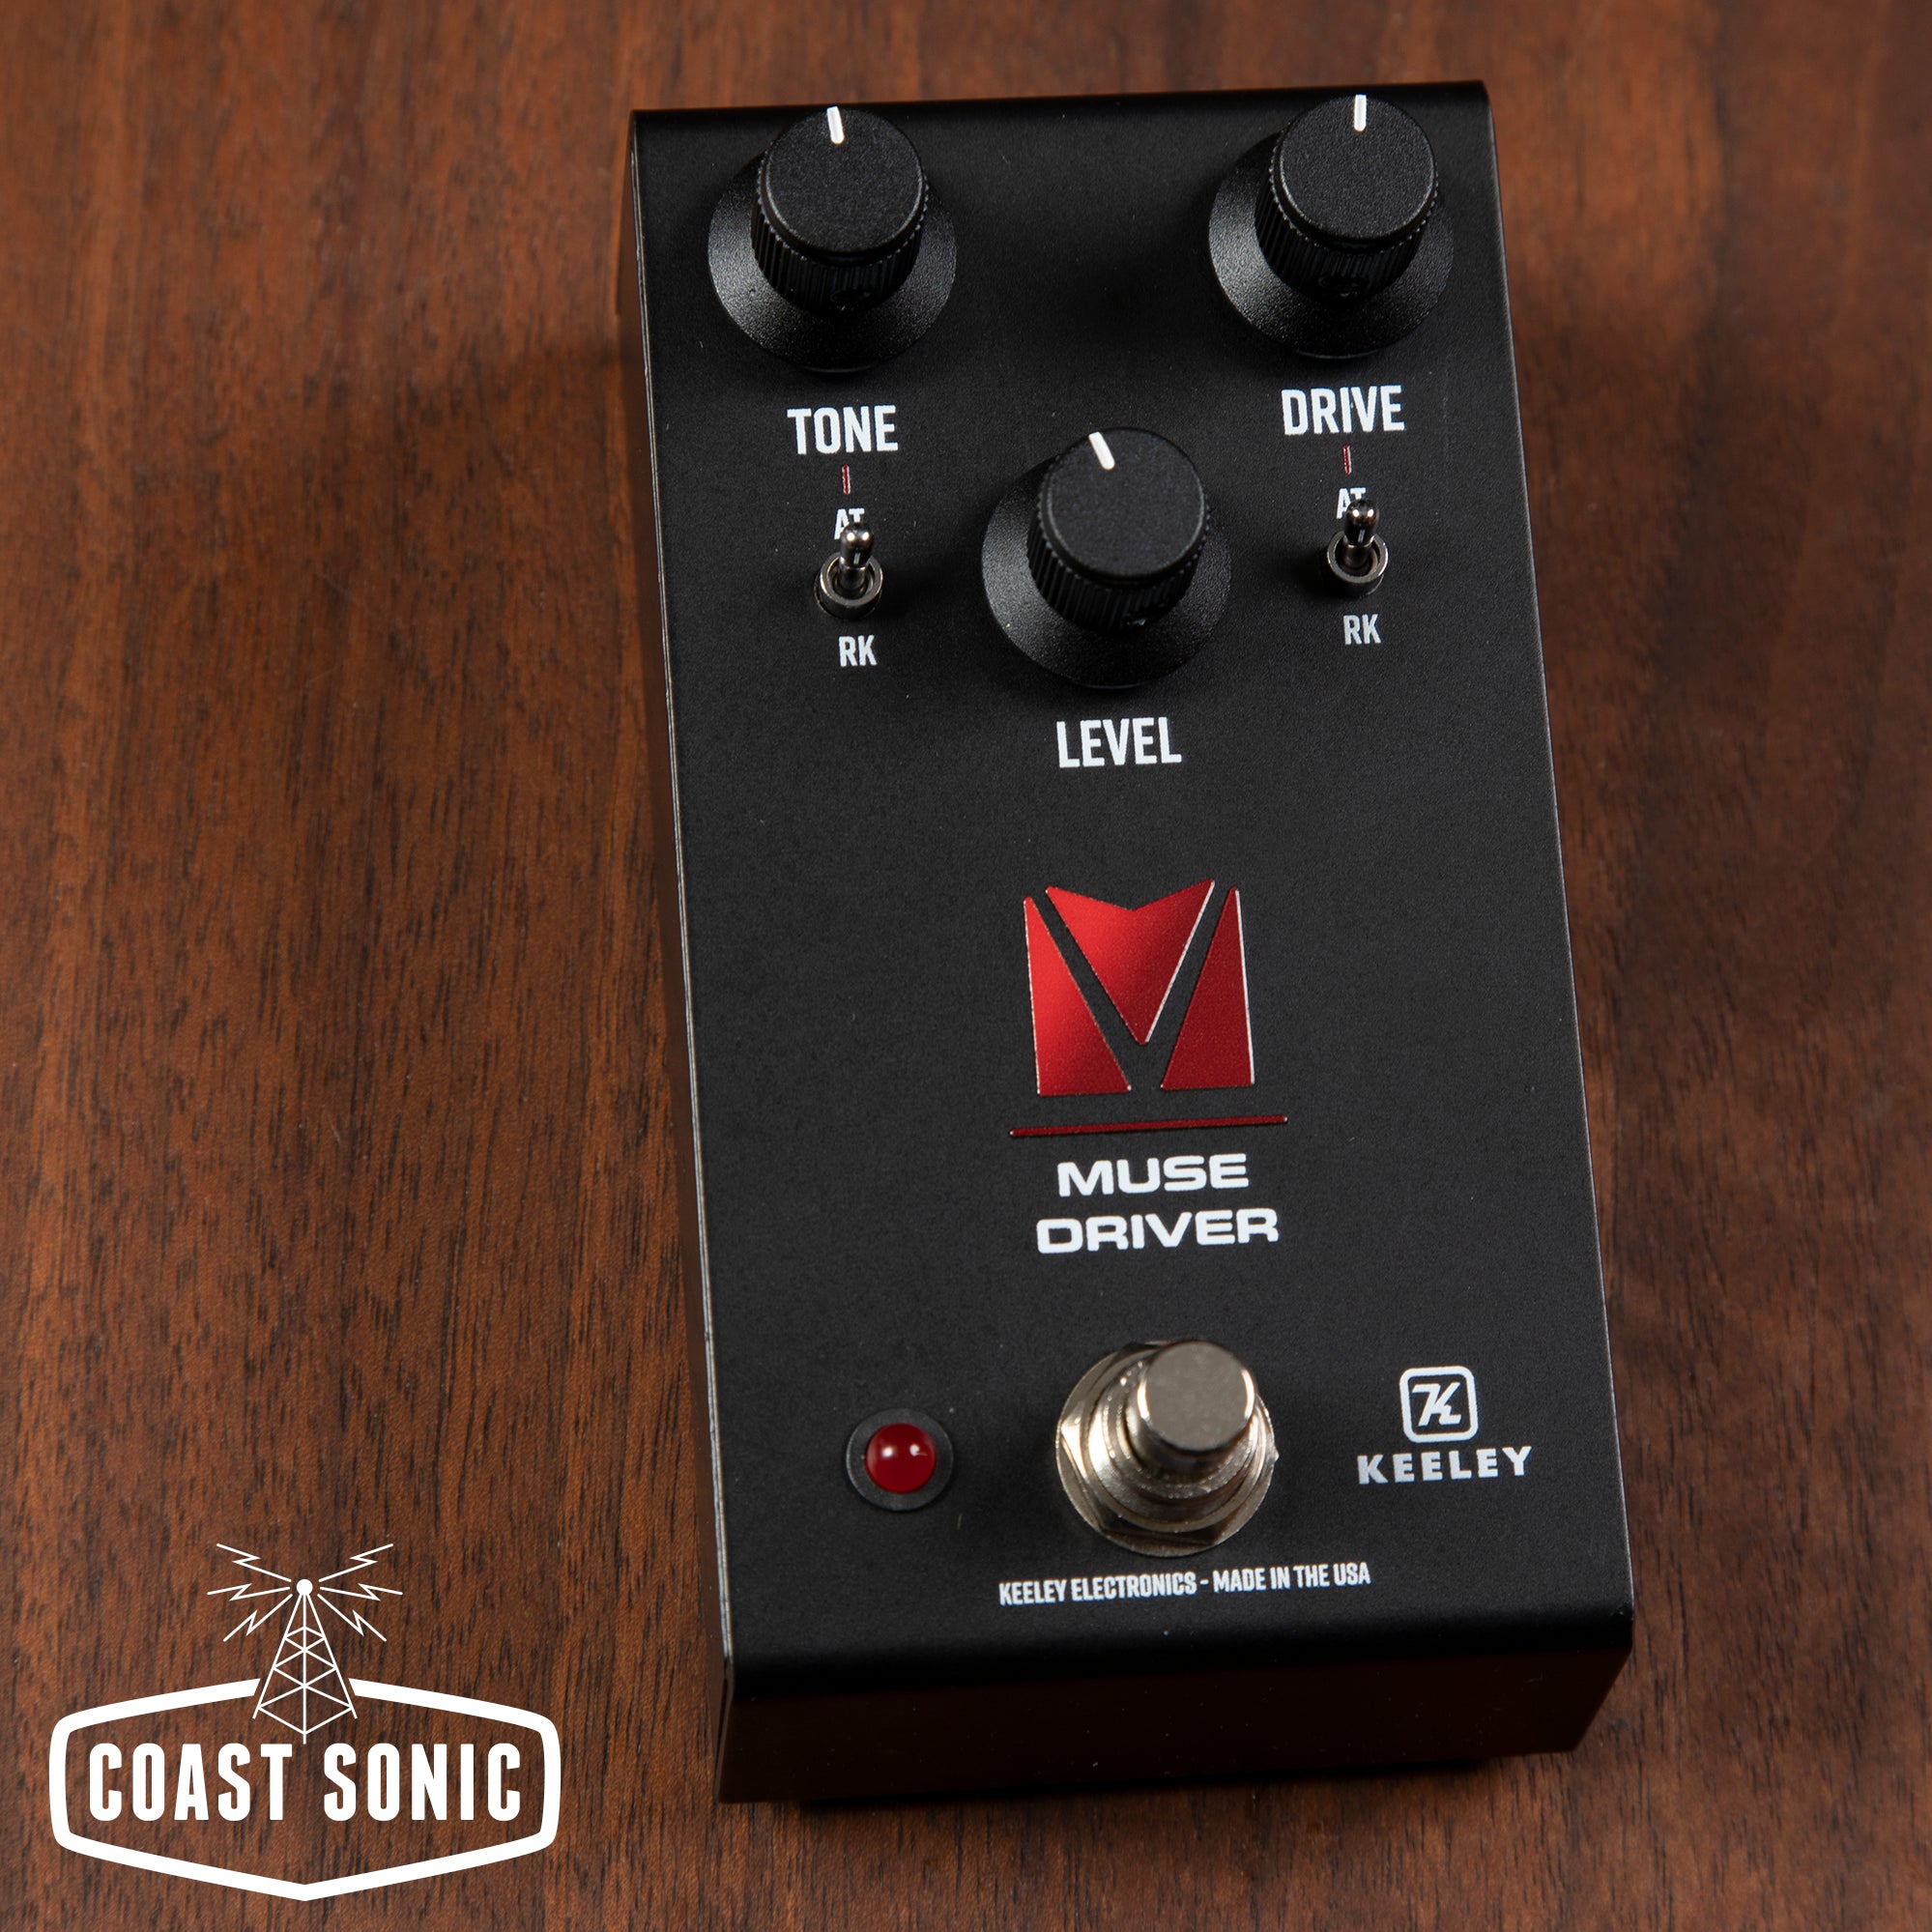 Keeley Electronics Muse Driver - Andy Timmons Full Range Overdrive